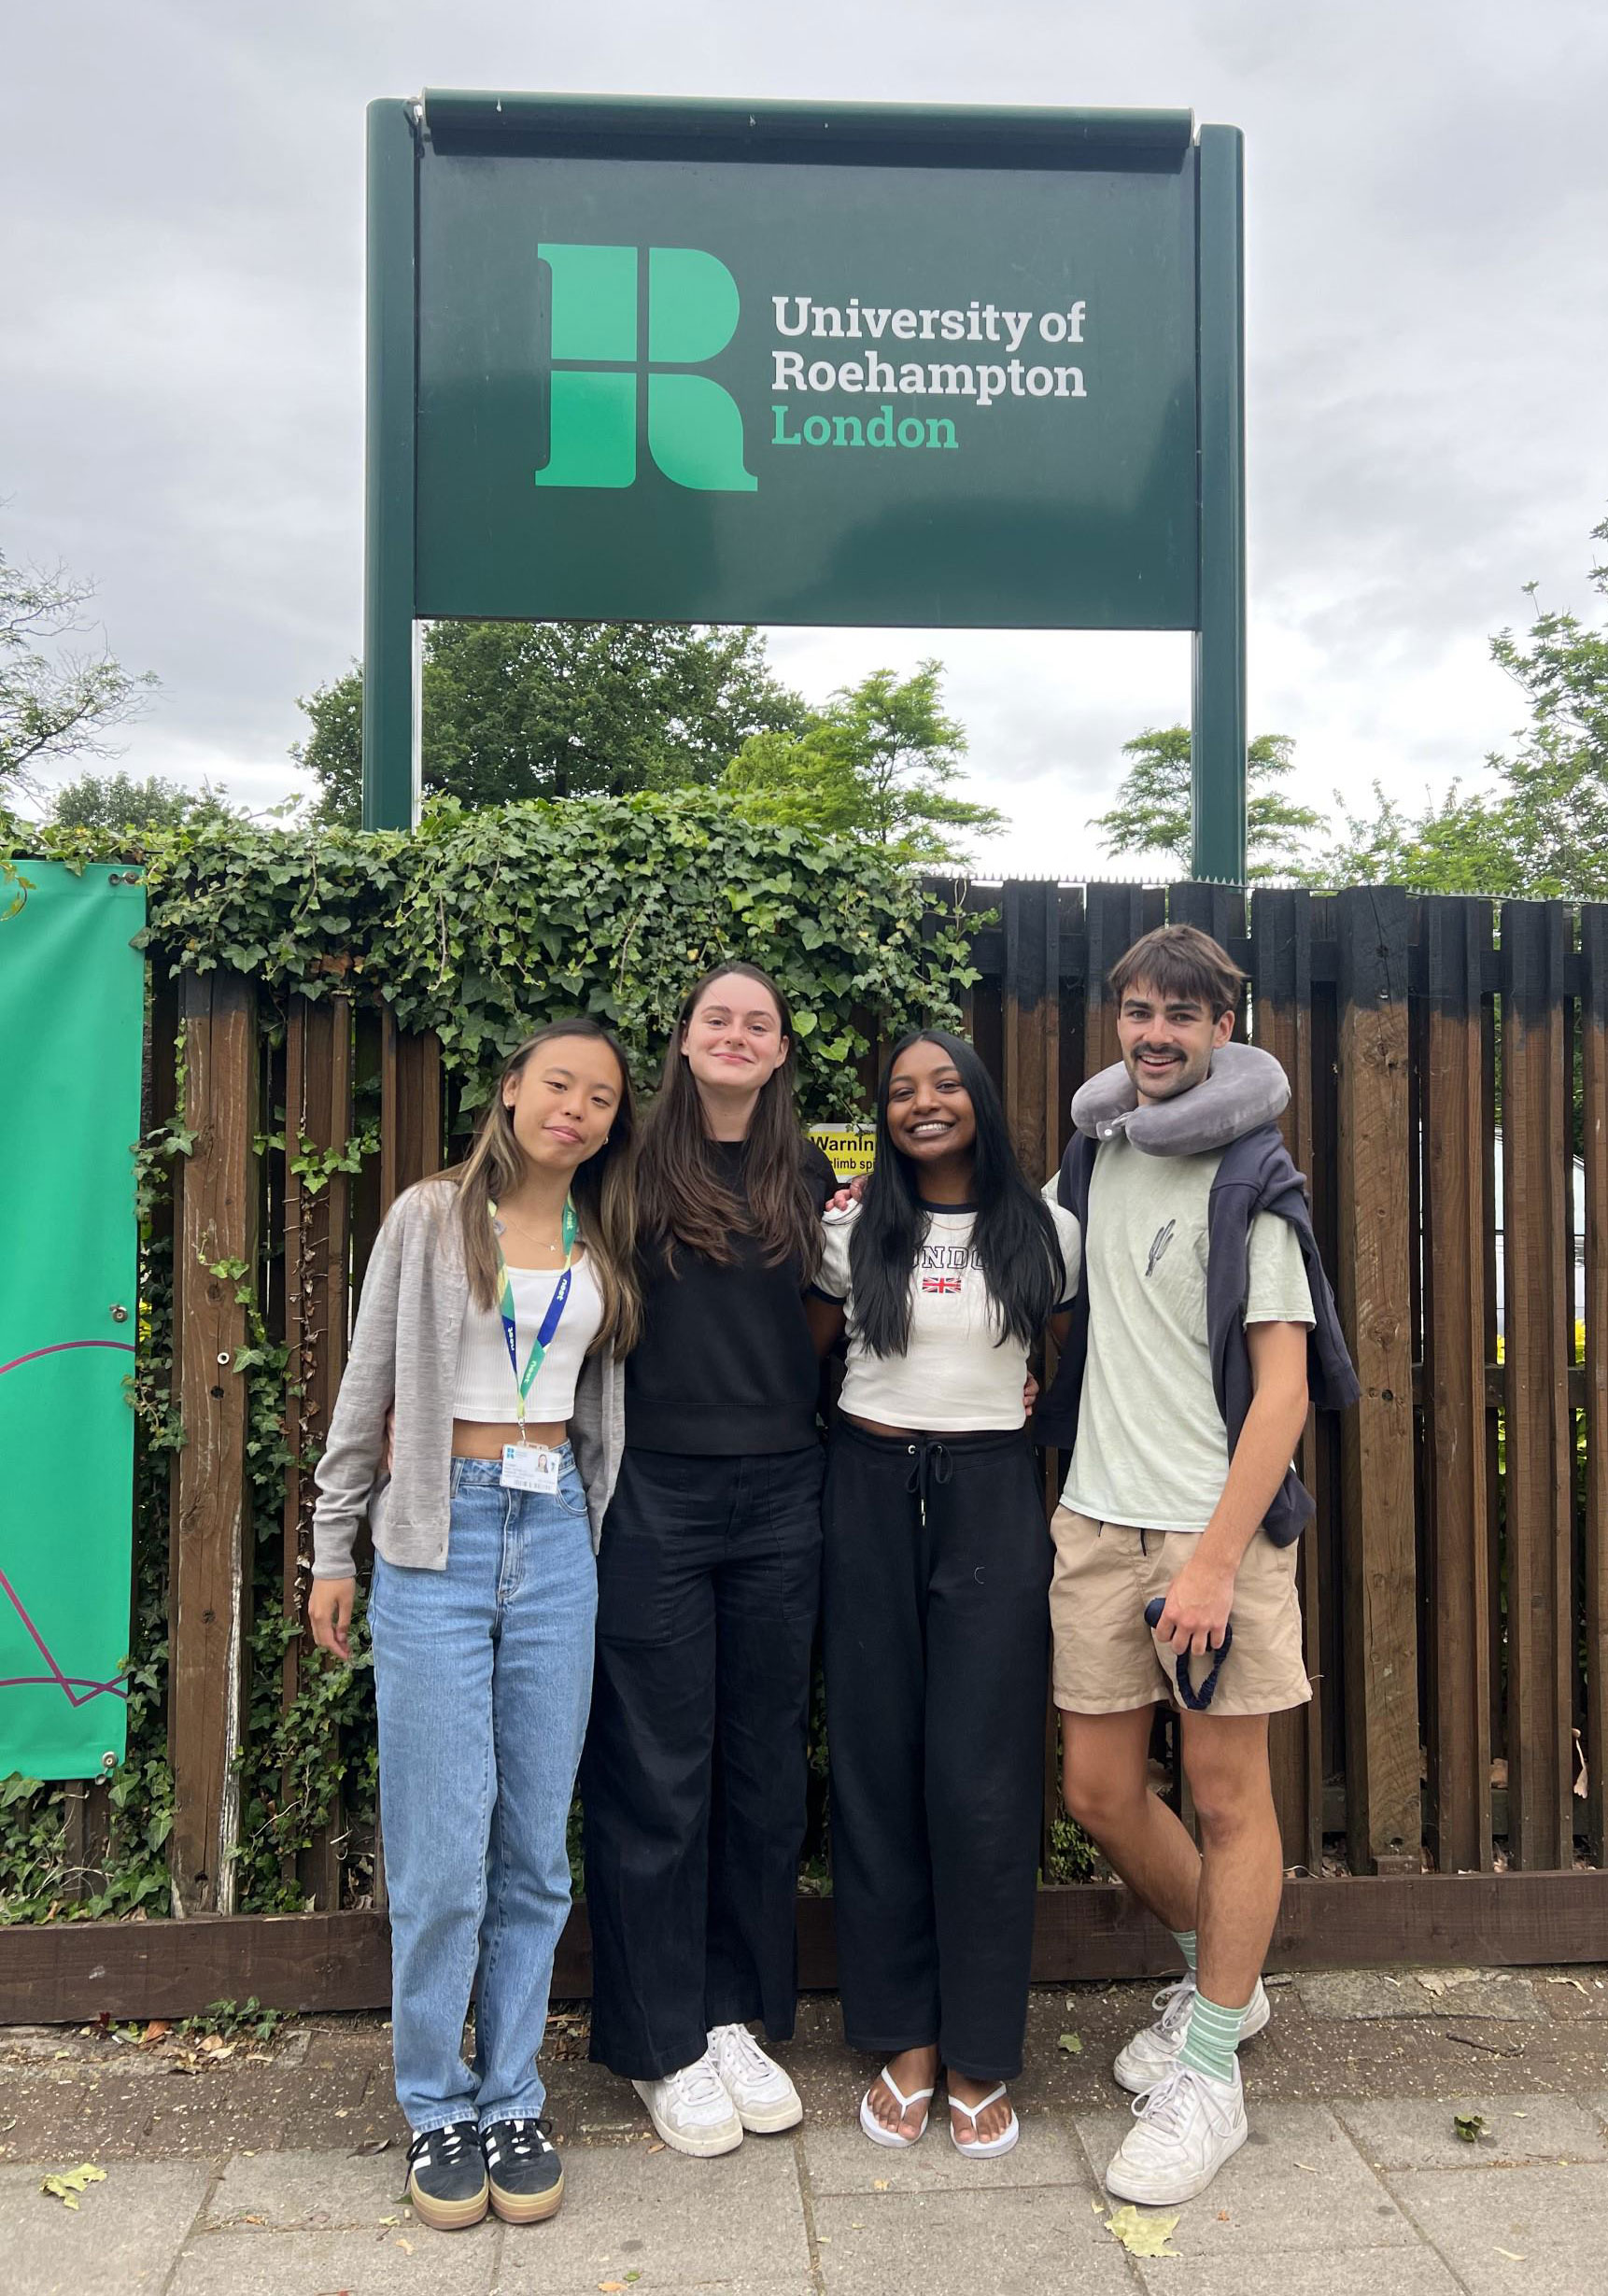 Ethan and friends stand in front of the University of Roehampton sign